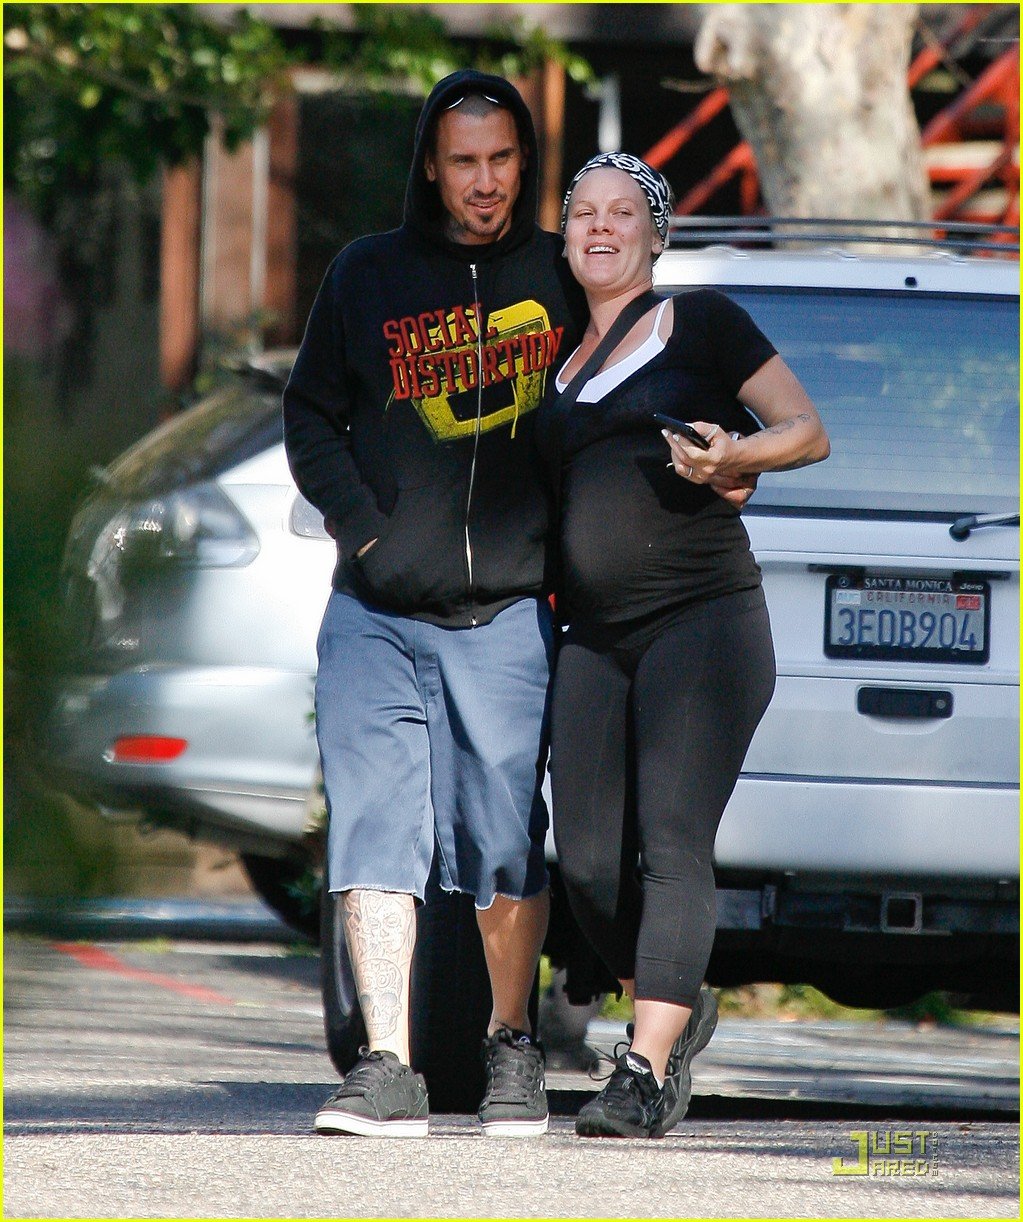 Mom-to-be Pink and her husband, professional motocross racer Carey Hart